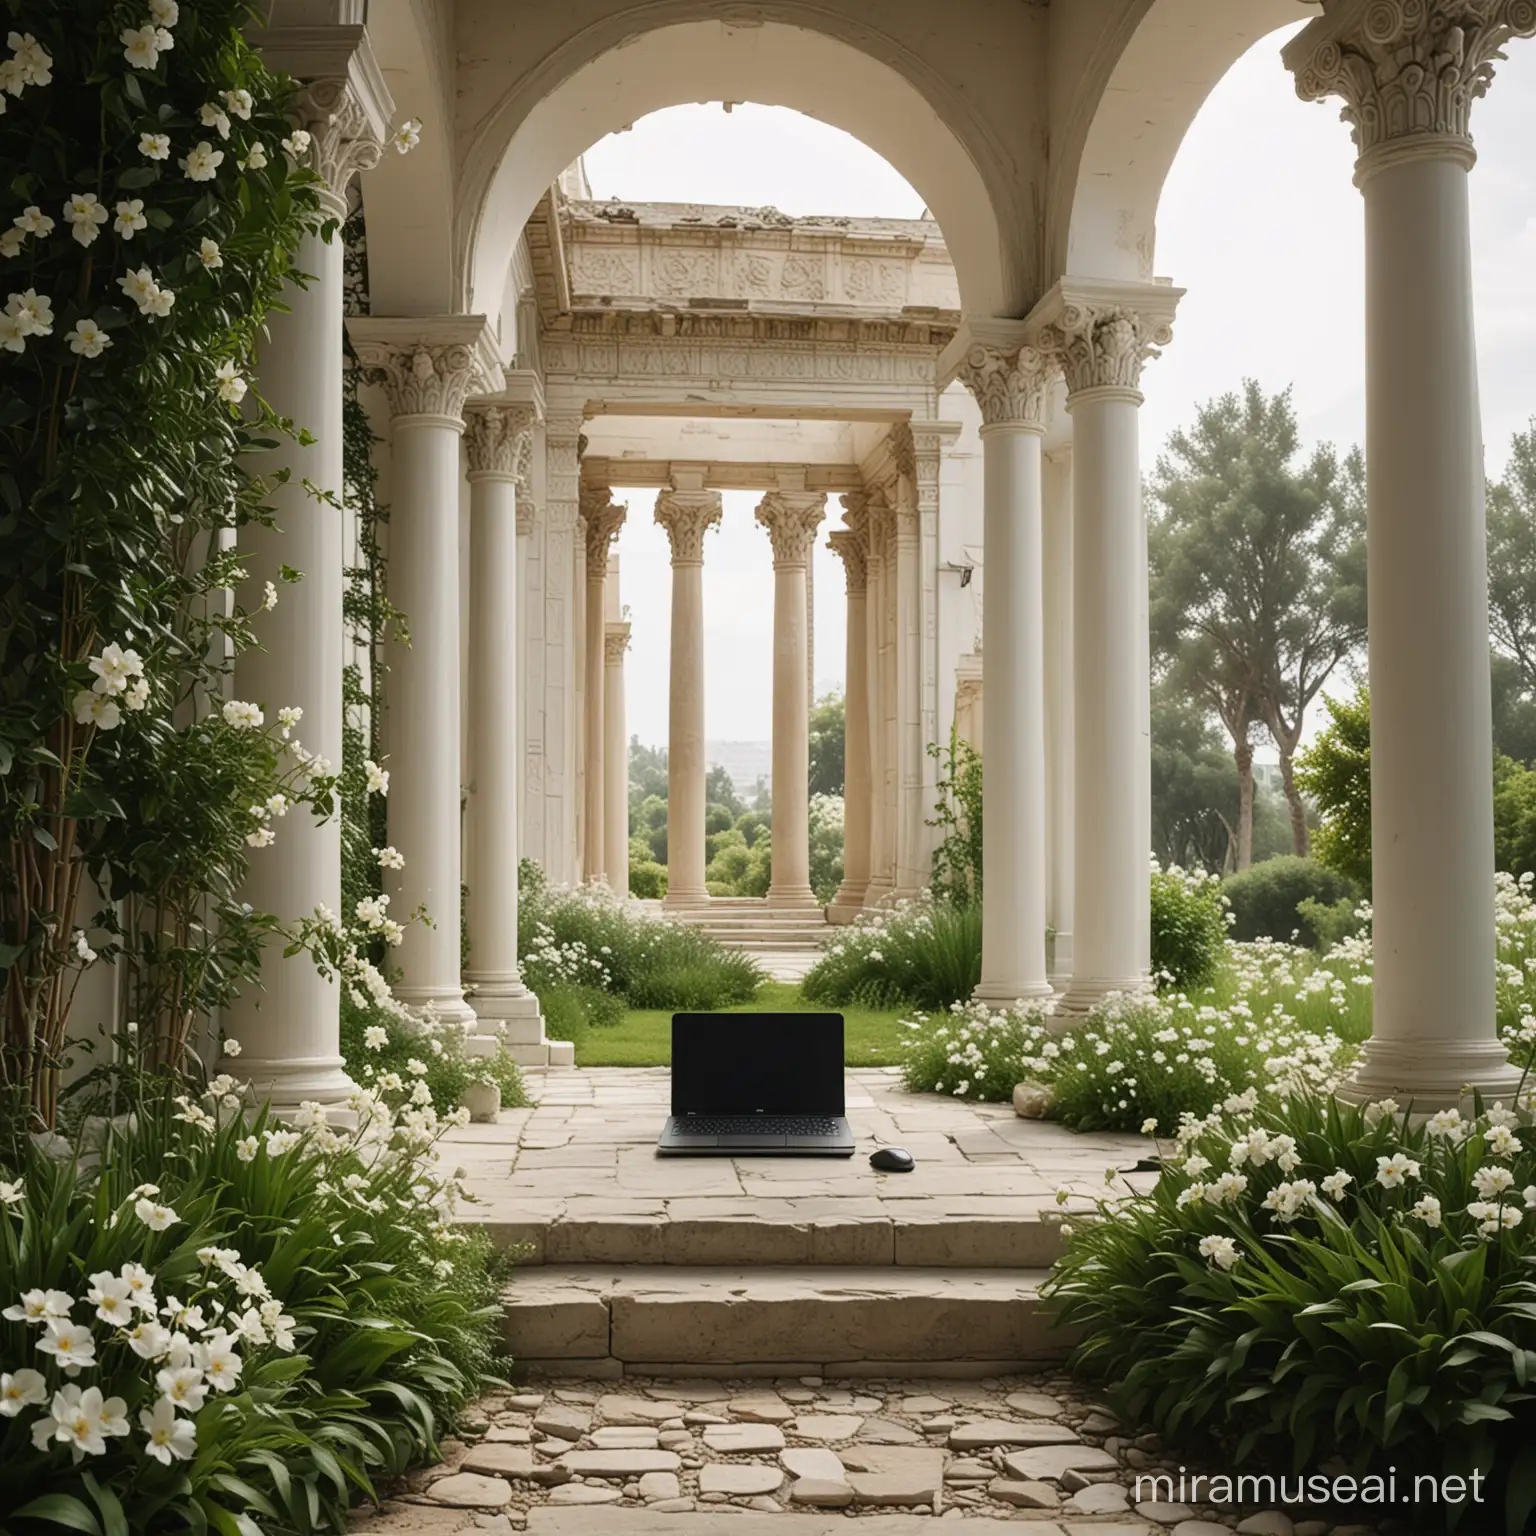  a laptop placed on top of a stone pedestal amidst green plants. The laptop WHITE screen and below it is an image of what appears to be a classical building with columns. A large stone is visible to the left of the pedestal, and white flowers are growing beside it sh. In the background, there’s part of a white column and a flowing white curtain that is slightly transparent, allowing some light to pass through. 4K high resolution 4K scene, captured as if by a NIKON D850  for impeccable sharpness
